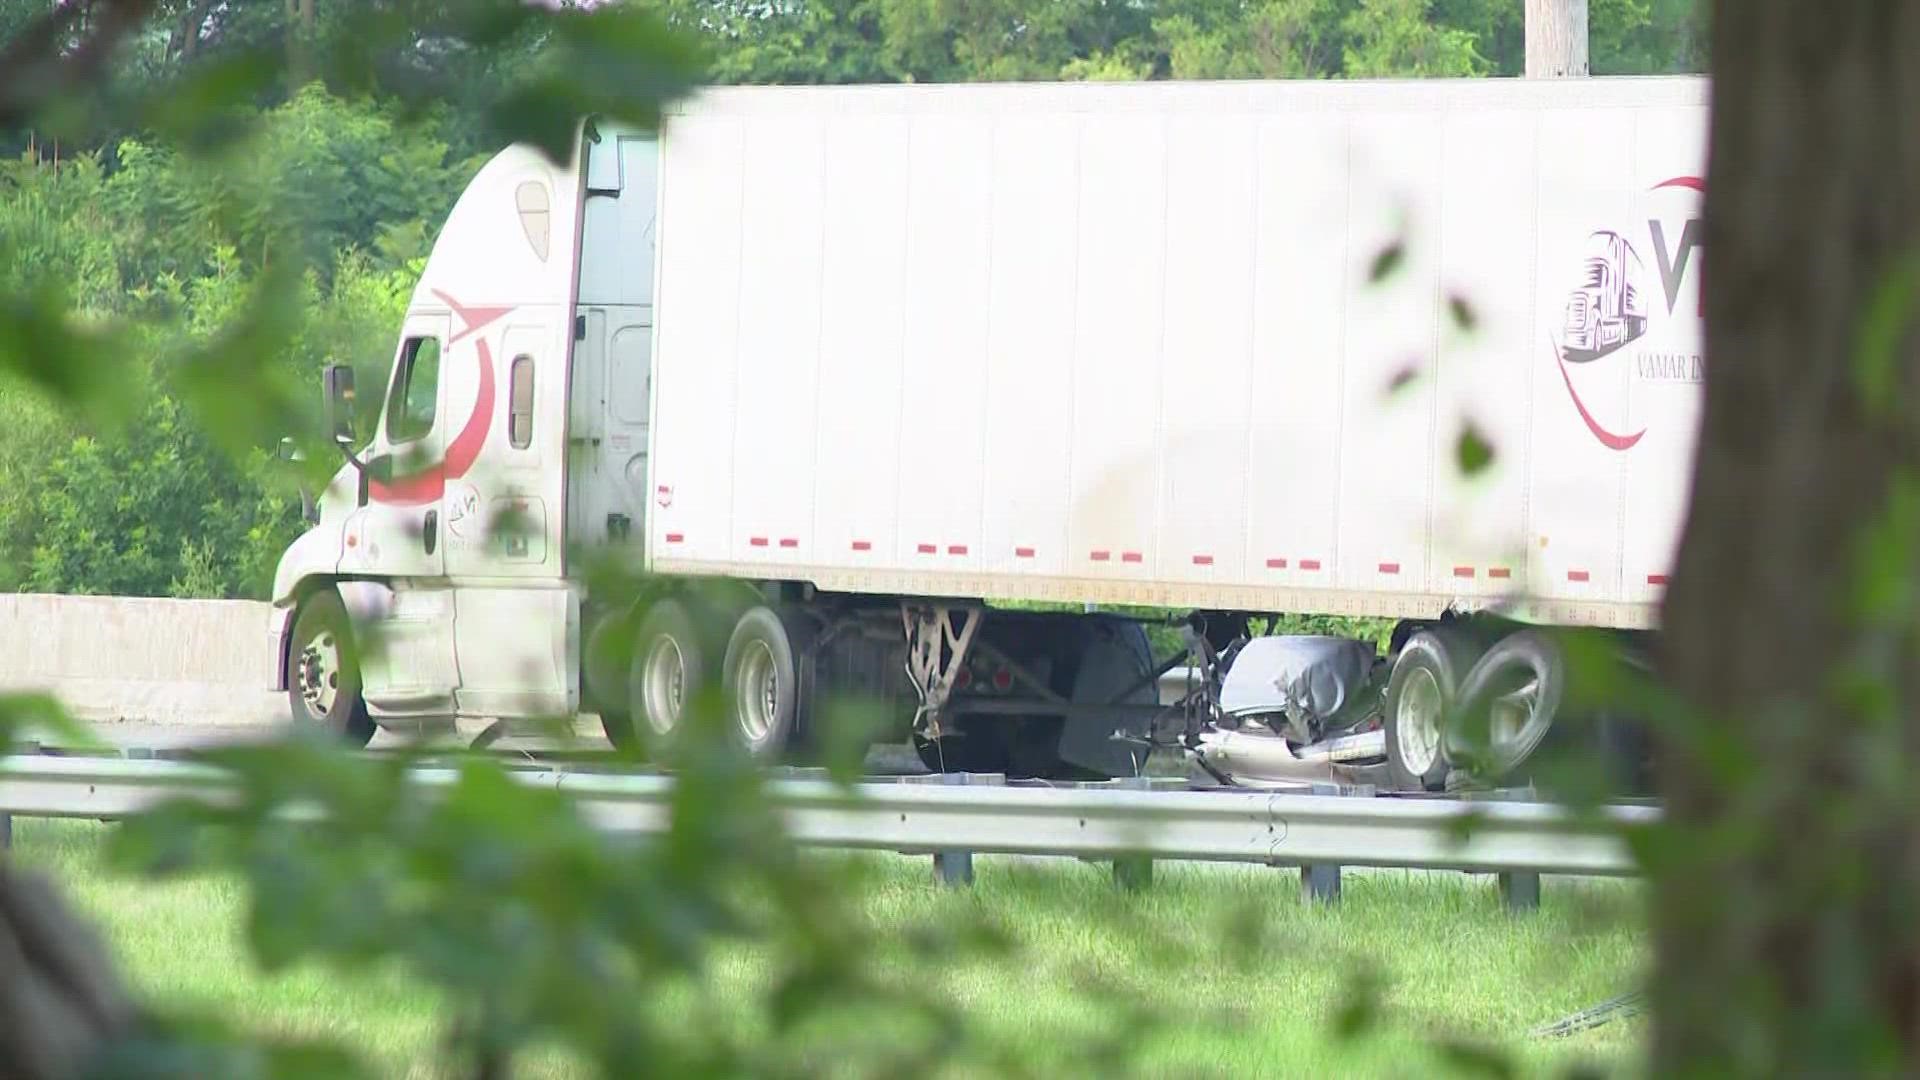 The crash happened shortly before 4:30 a.m. on I-65 south in Boone County, near the 865 interchange.